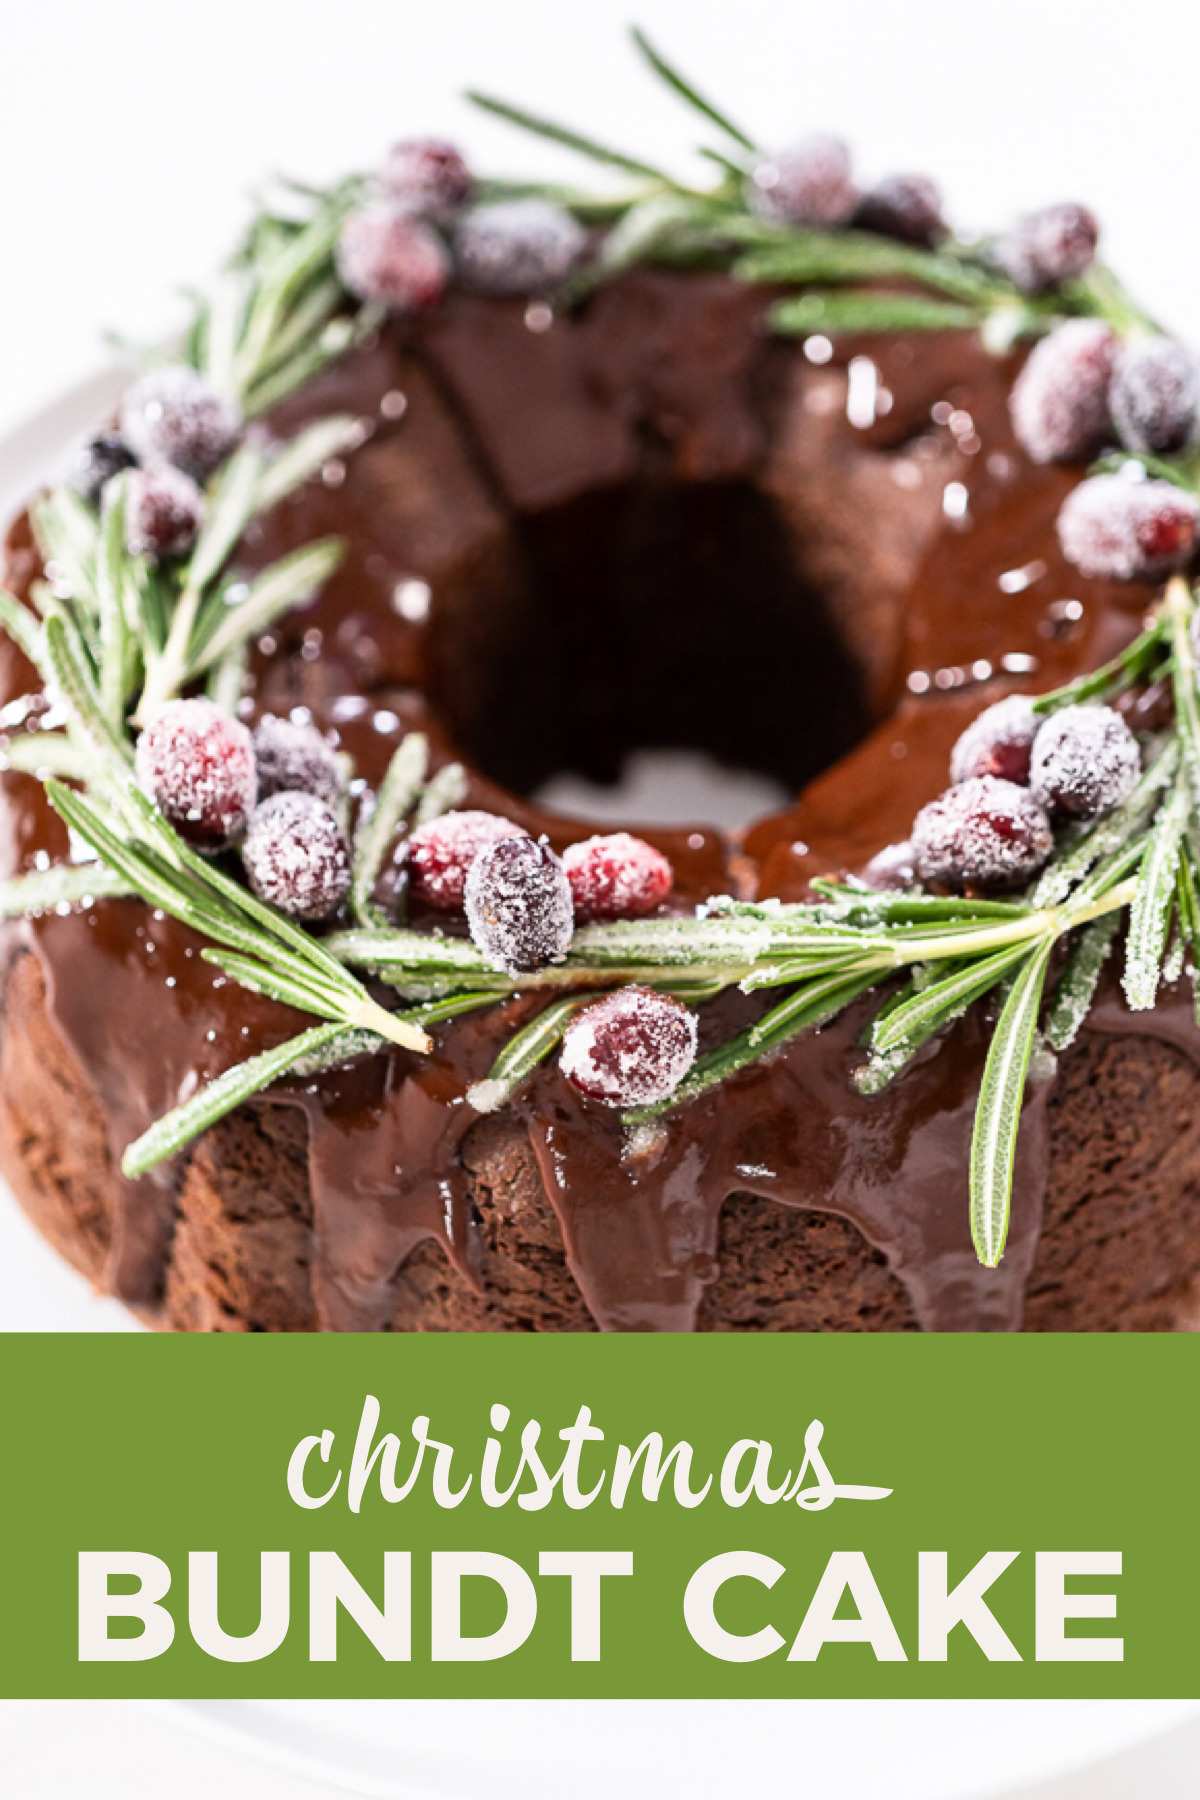 Christmas Chocolate Bundt Cake with Chocolate Frosting